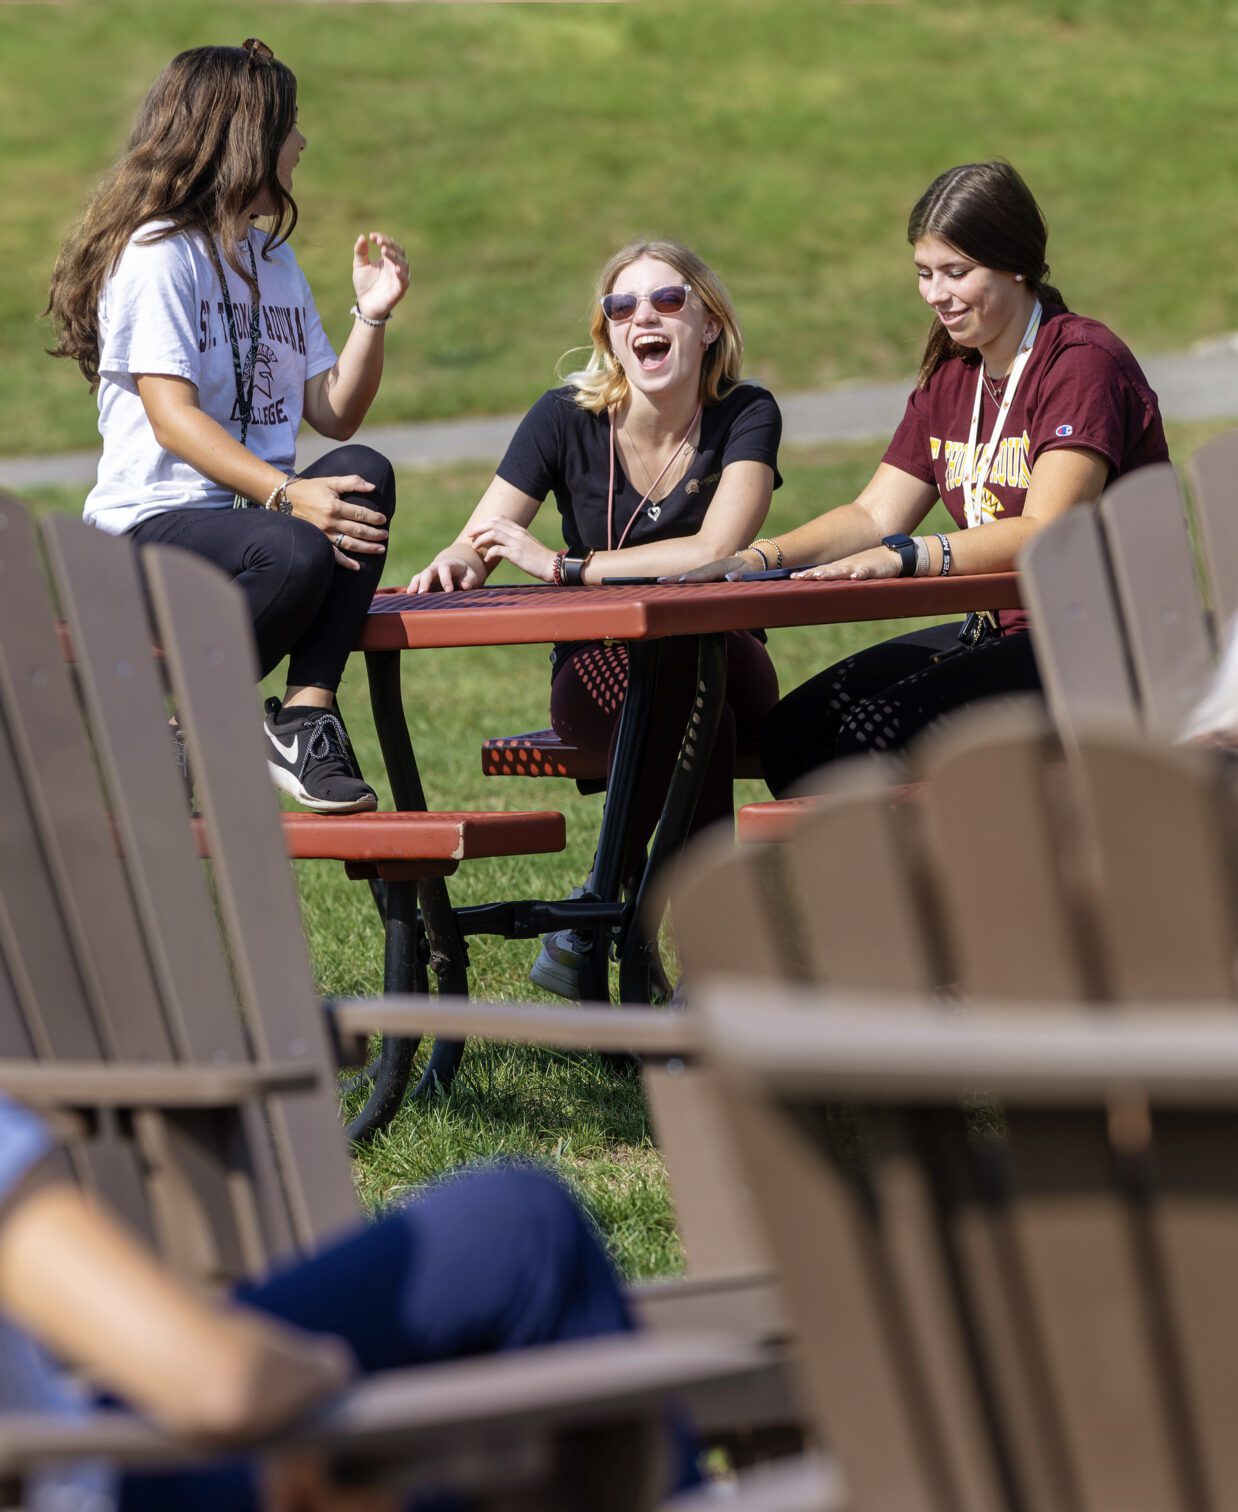 Three female students laughing and enjoying the outdoors